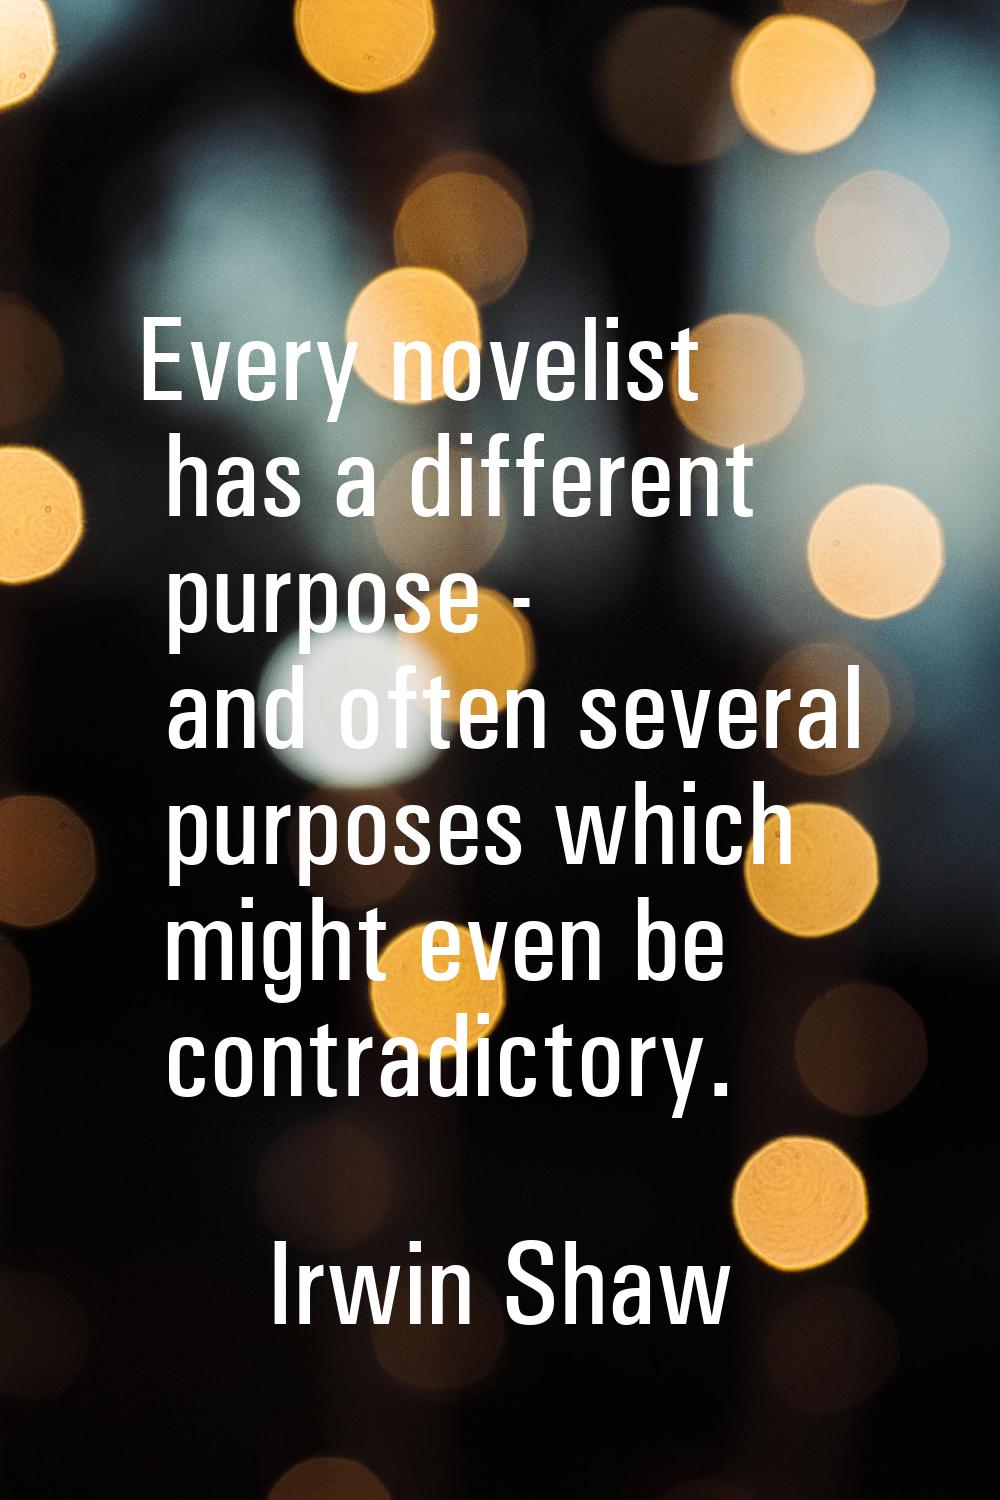 Every novelist has a different purpose - and often several purposes which might even be contradicto